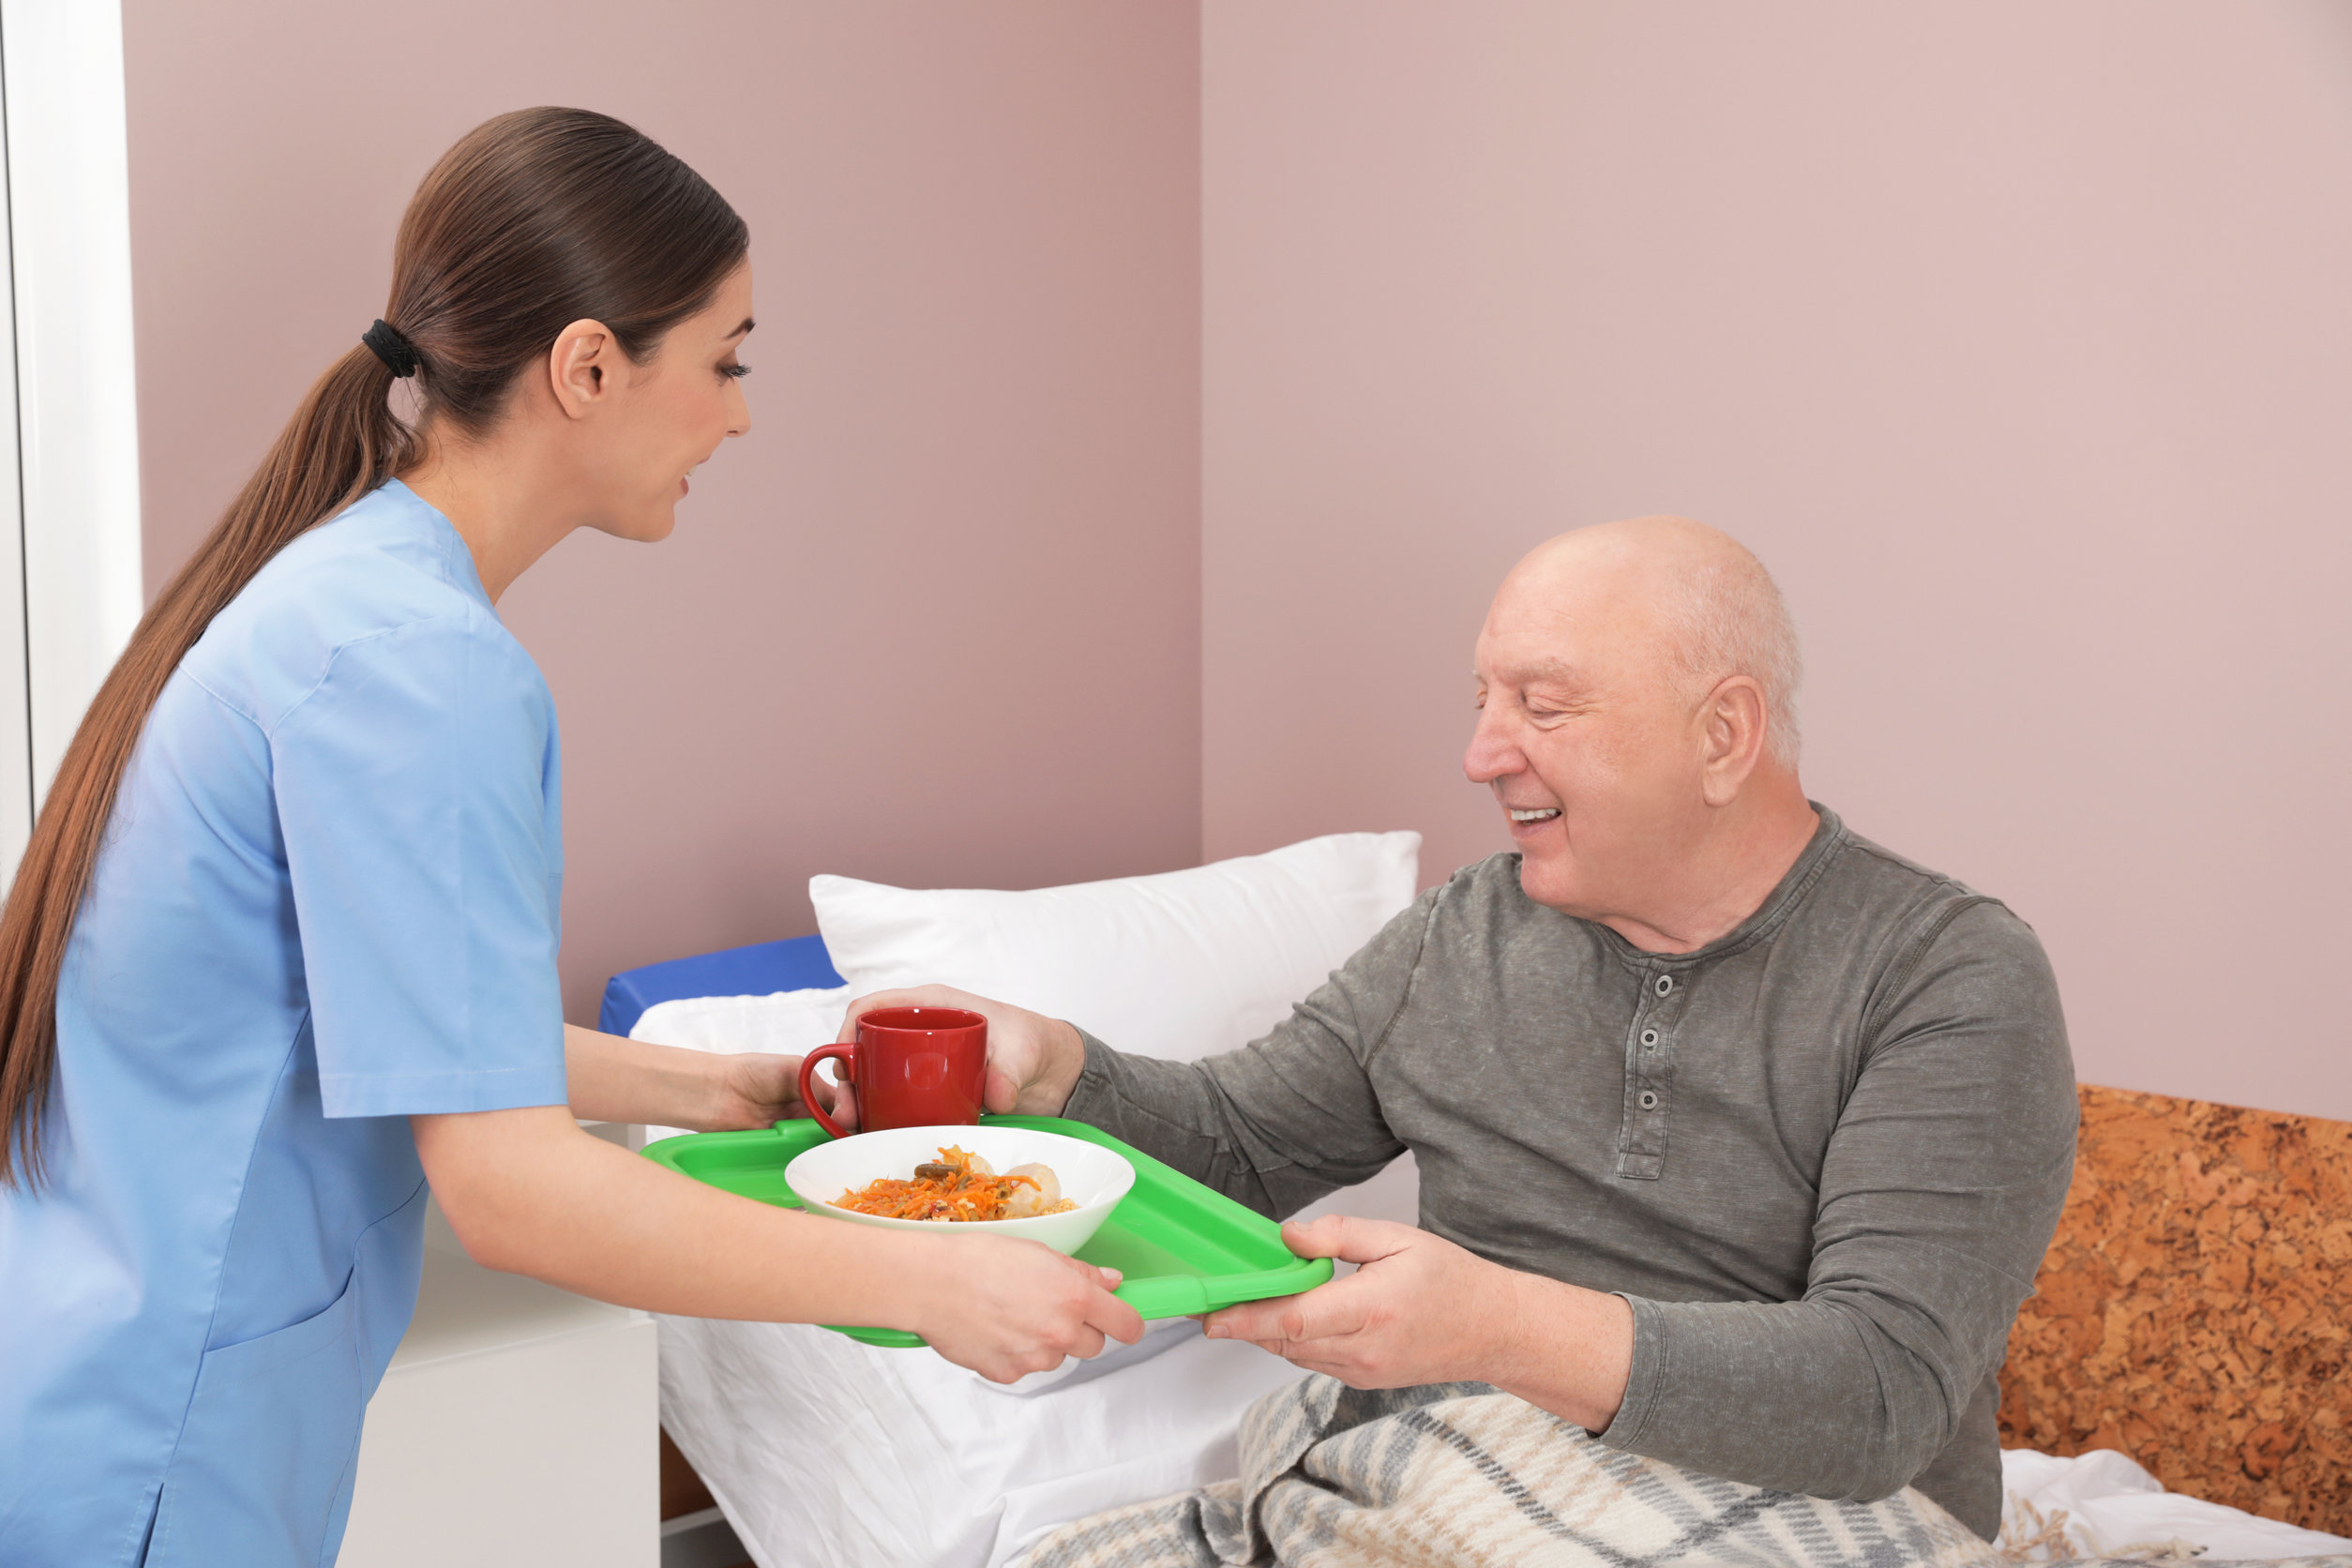 Nurse giving tray with food to senior patient in hospital ward. Medical assisting